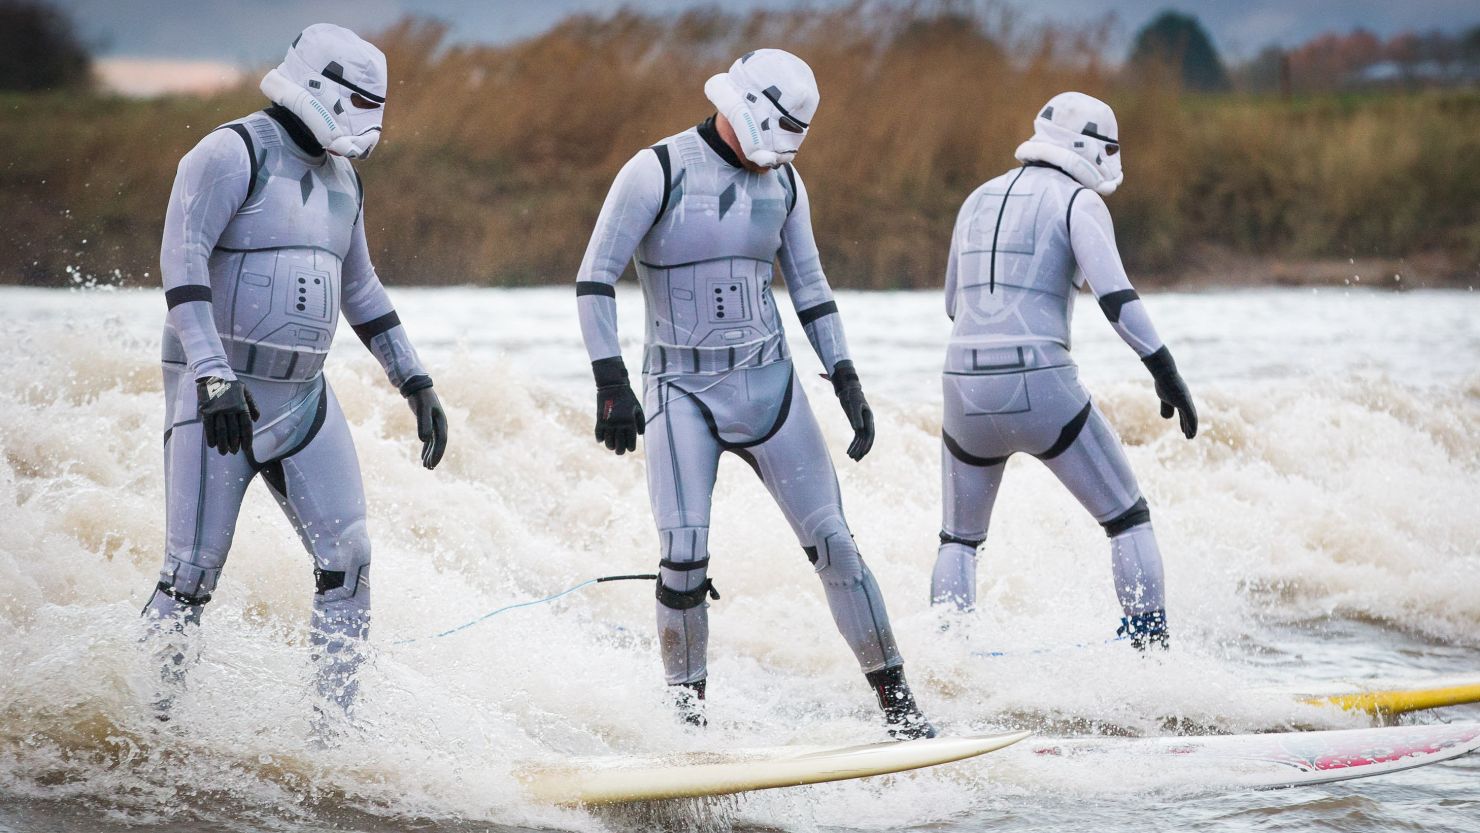 Surfers dressed up as stormtroopers to highlight "The Force Awakens" location in nearby woods.